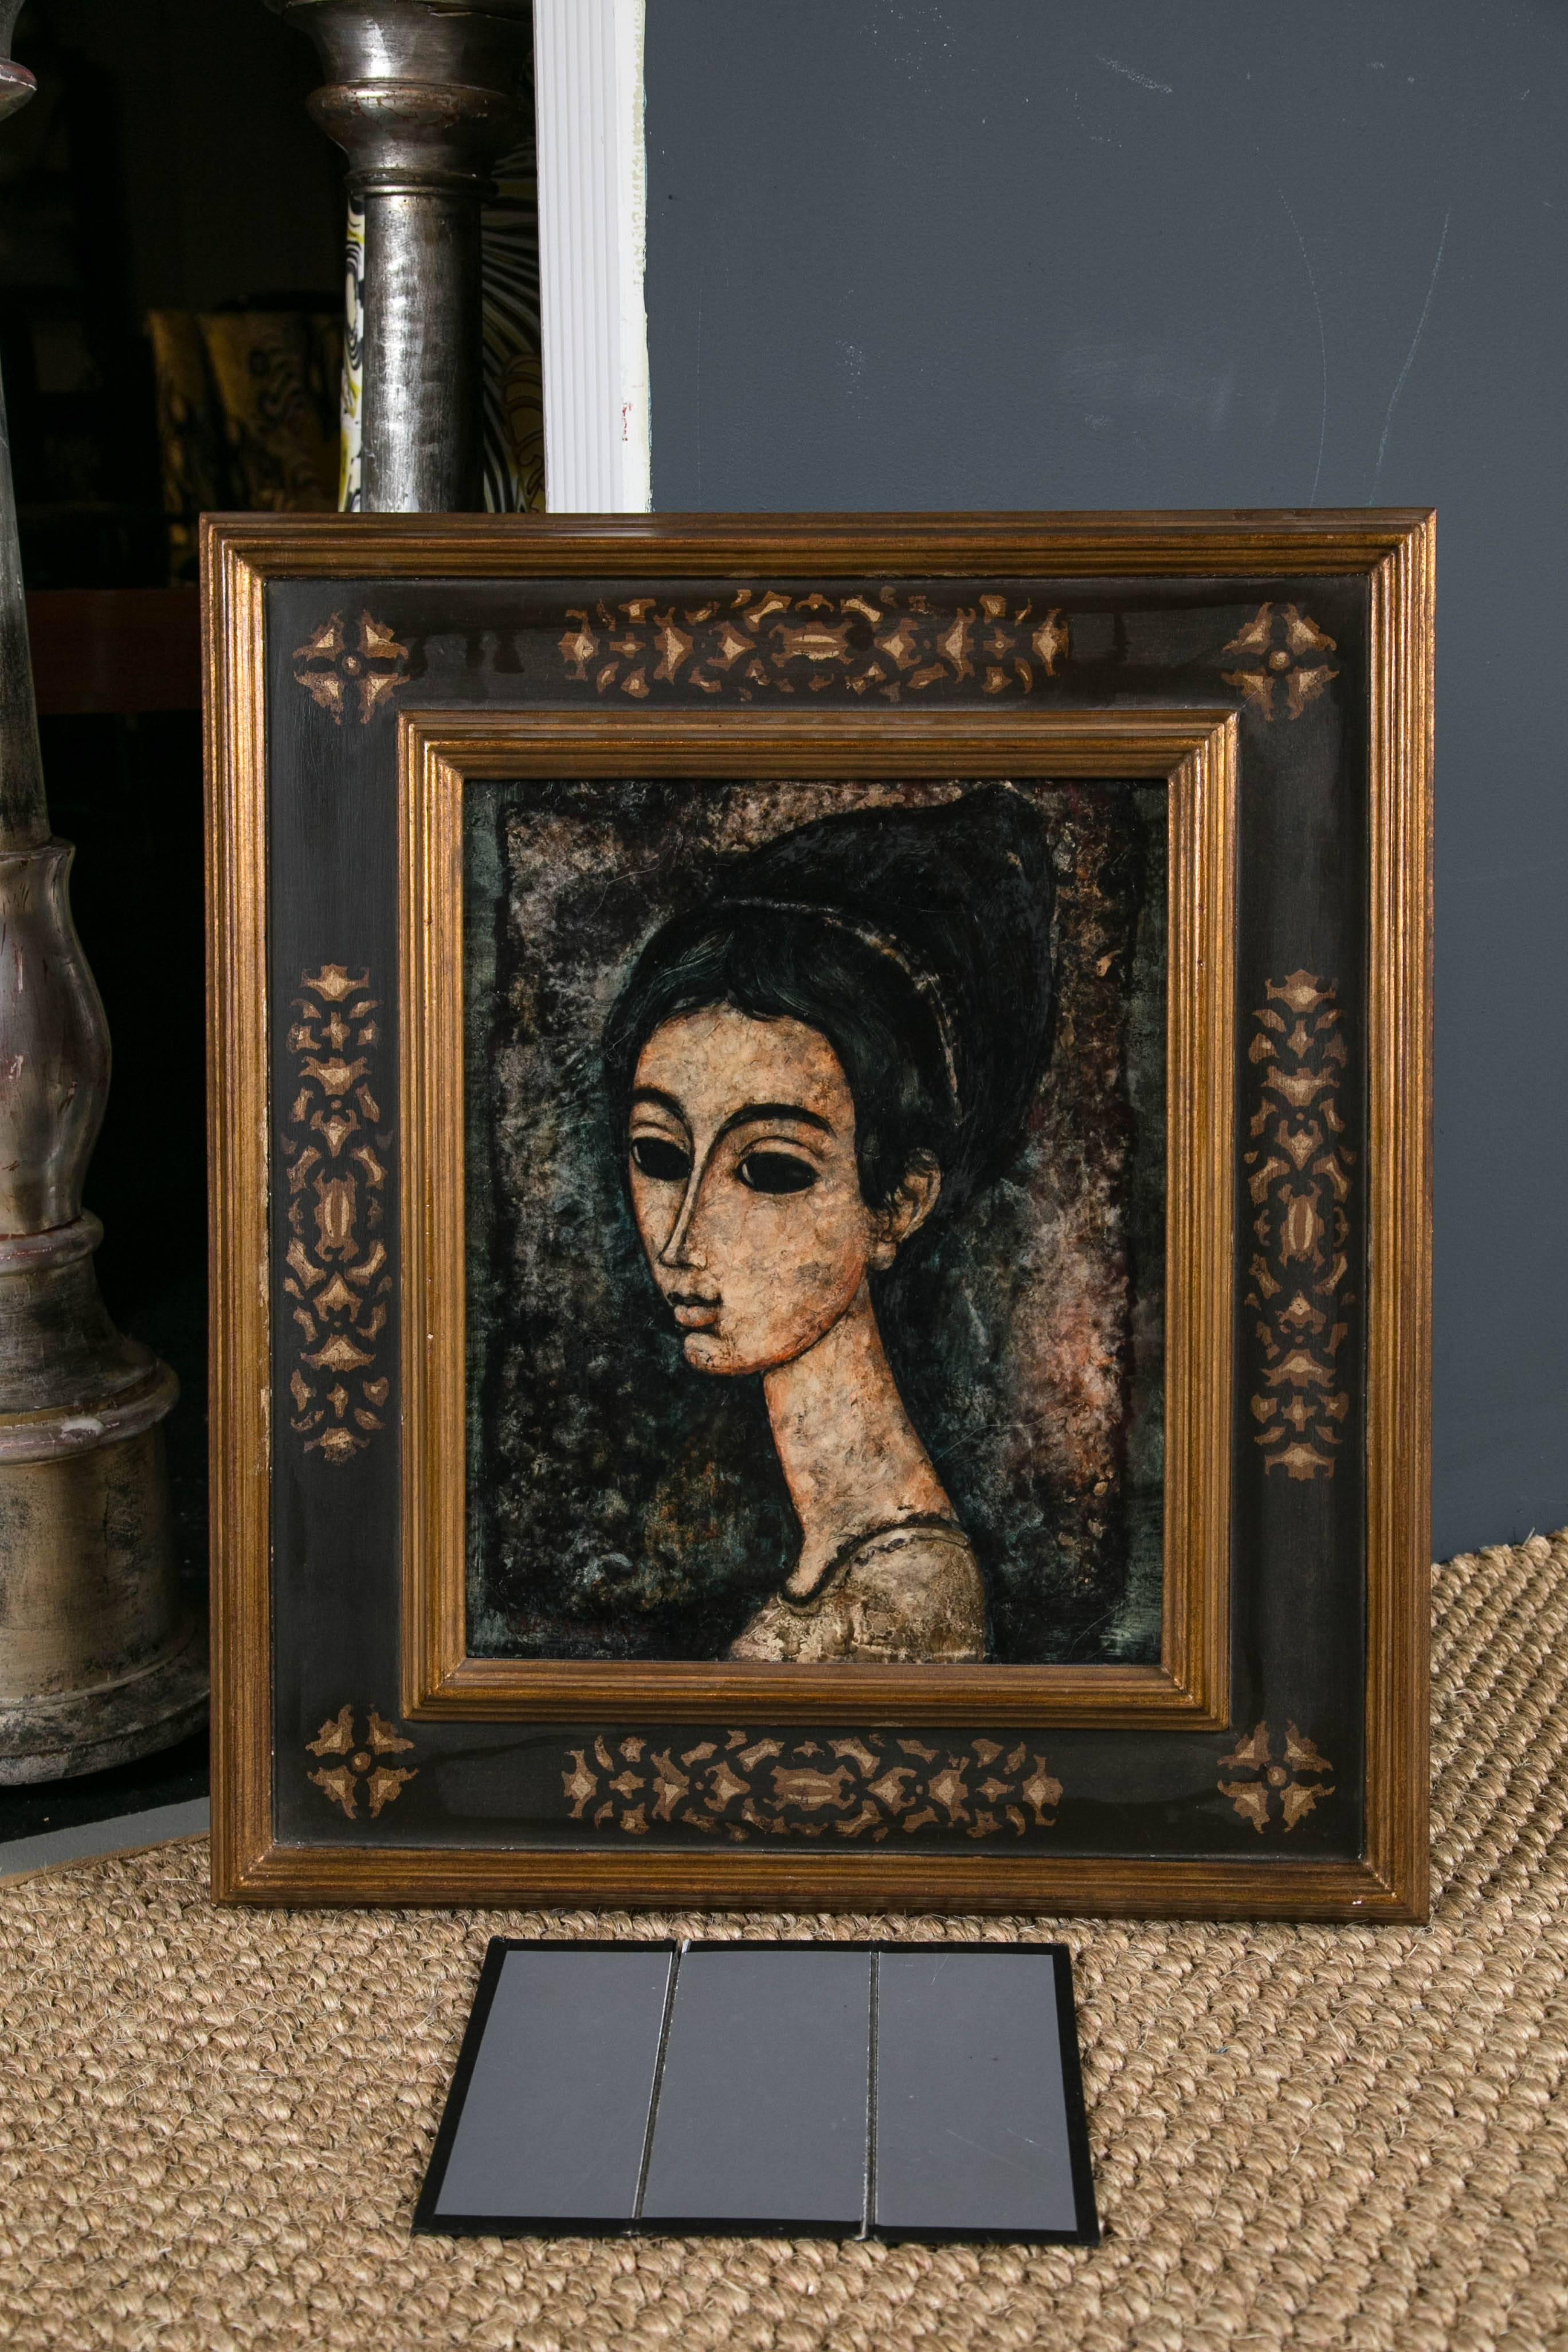 A vintage modernist painting done in the manner of Modigliani depicting a distinguished lady. Having masterful composition with subtle brush strokes showing expression. Artist signed (illegible) in its original midcentury frame.